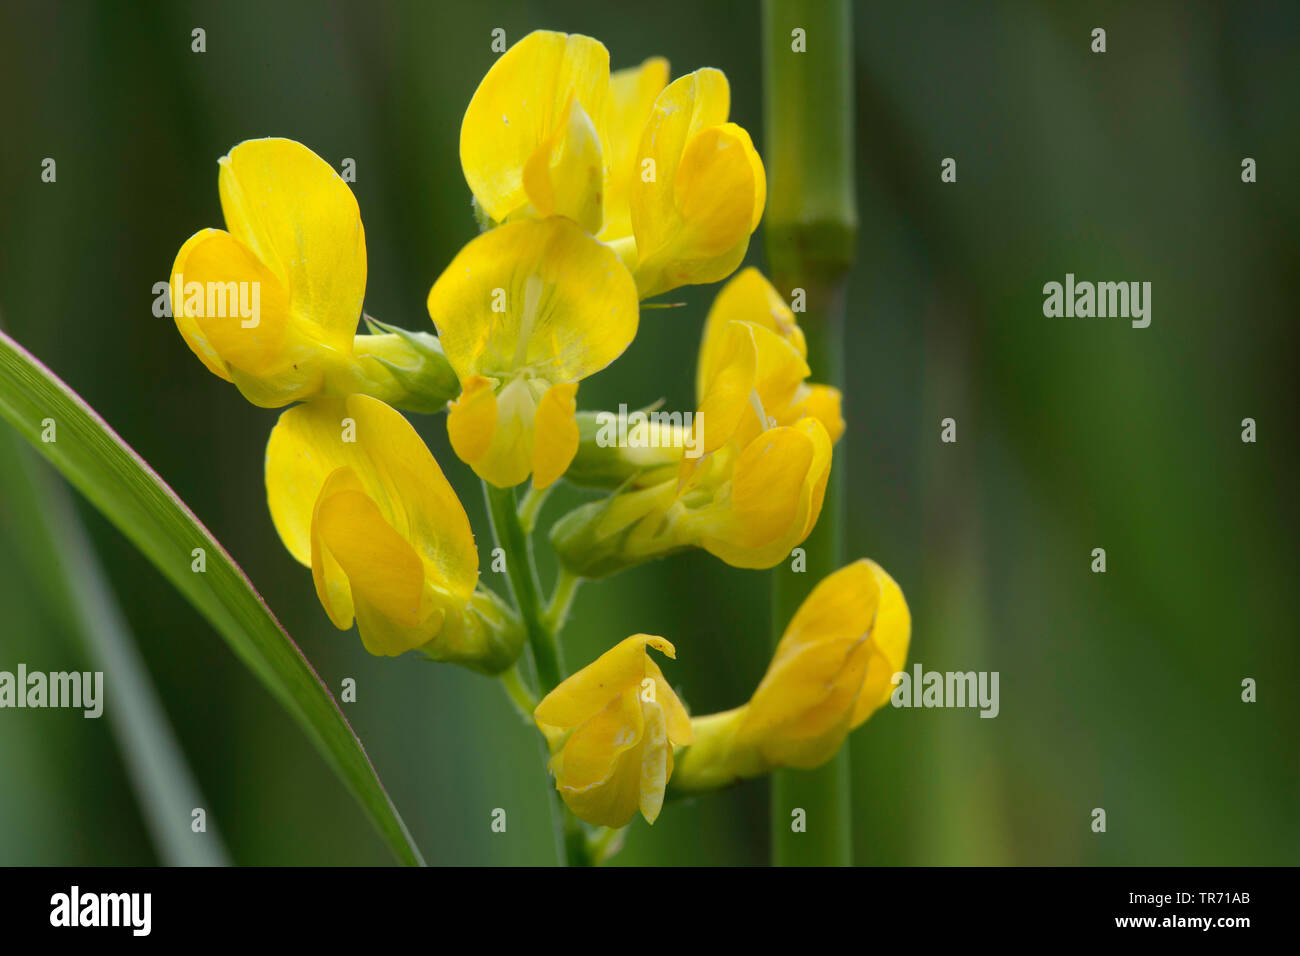 Meadow peavine, Meadow vetchling, Yellow vetchling (Lathyrus pratensis), inflorescence, Germany, Bavaria Stock Photo